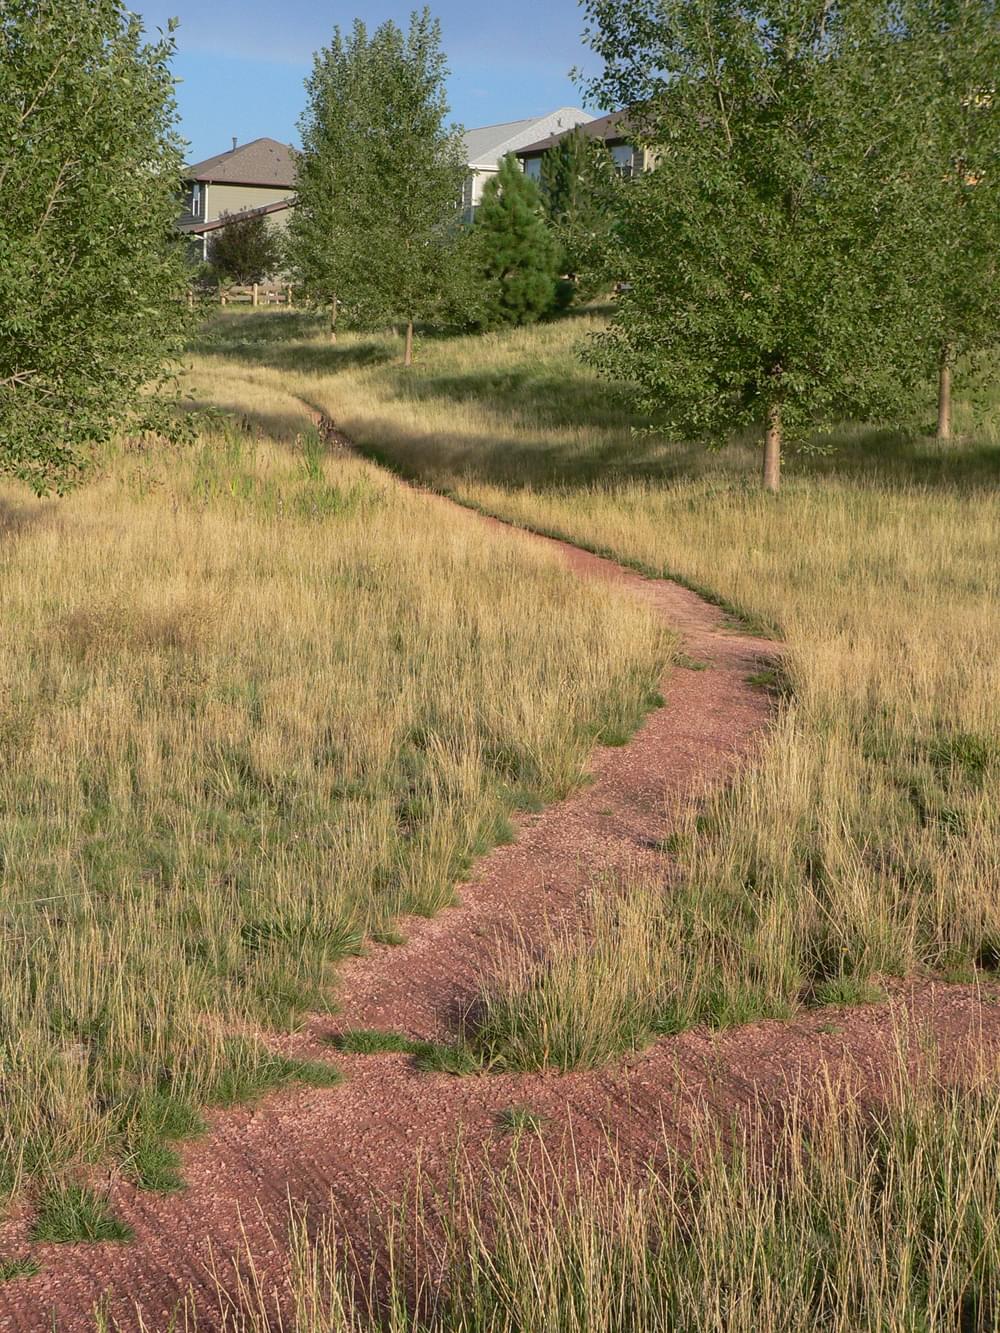 Single track crusher fines trail through grass along Little Dry Creek; Arvada, Colorado